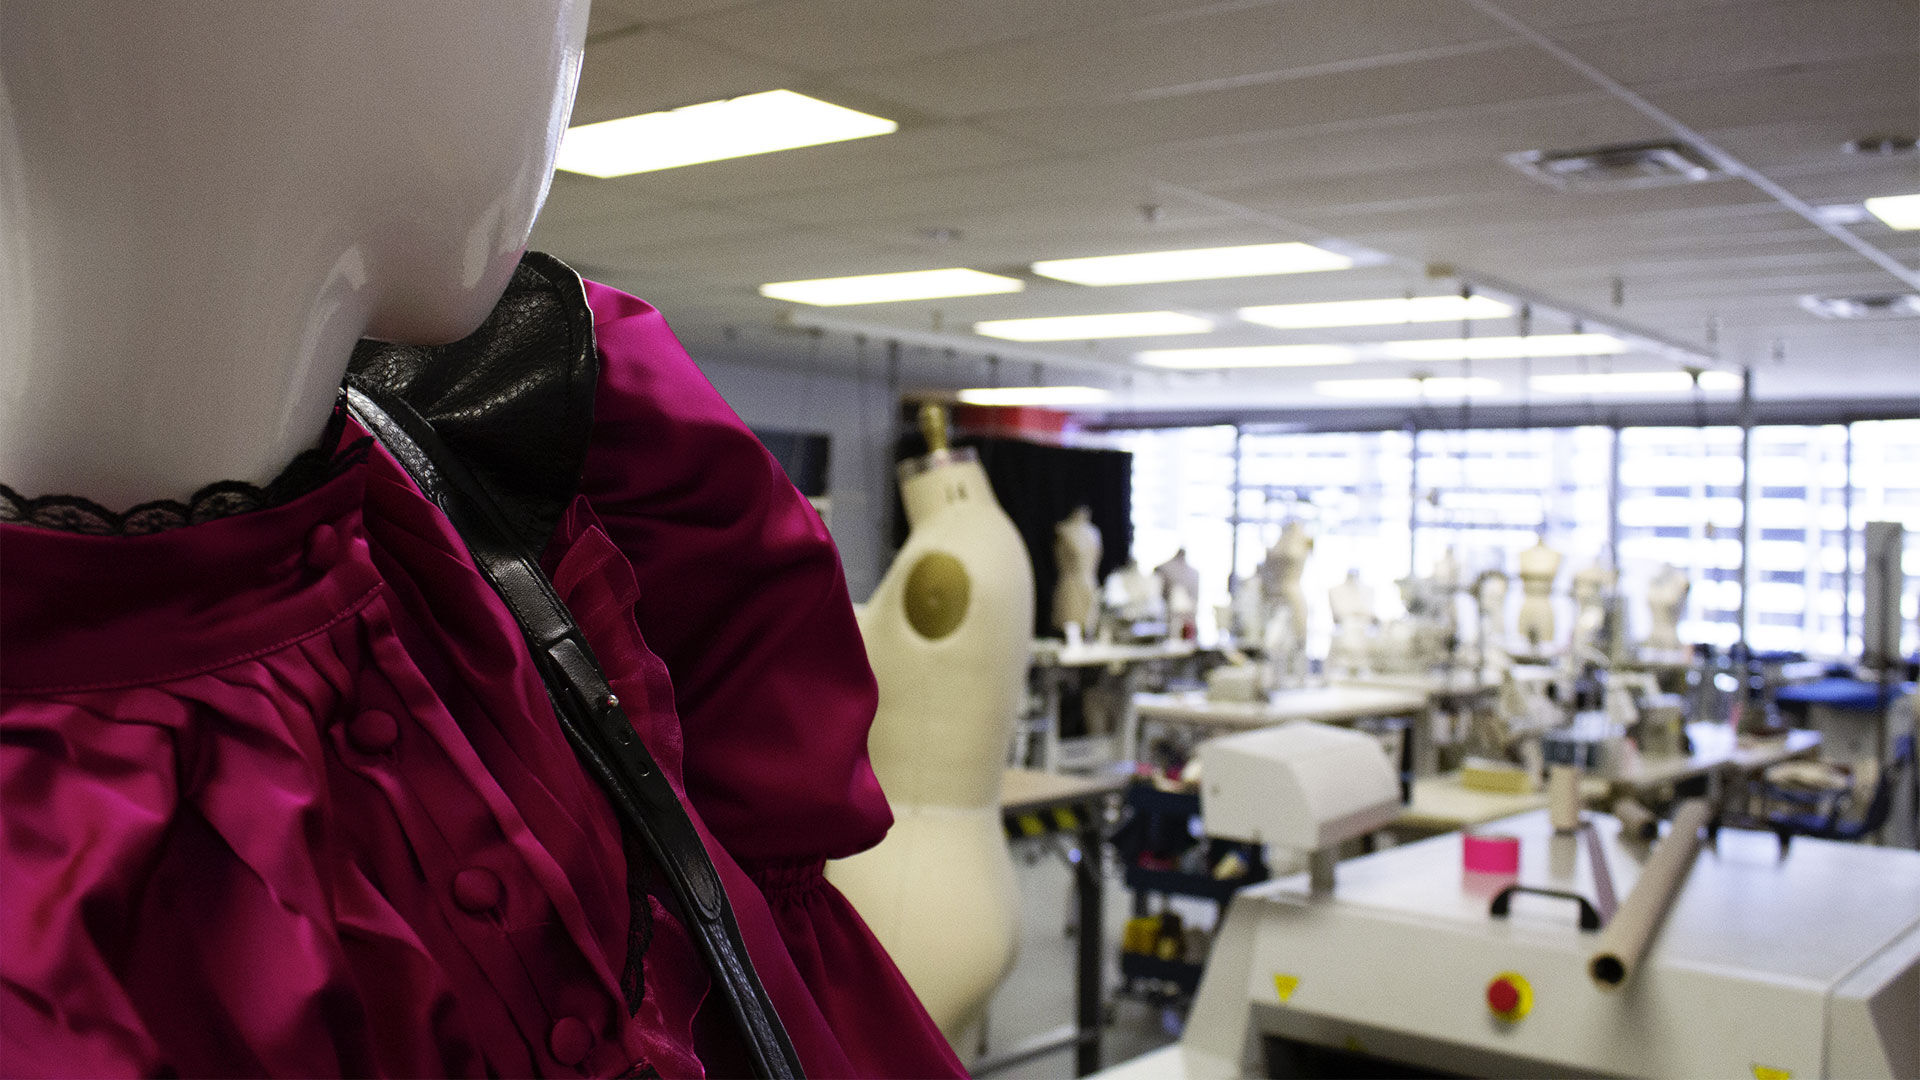 Mannequin in a design studio, wearing a garment in progress, with sewing stations and dress forms in the background.